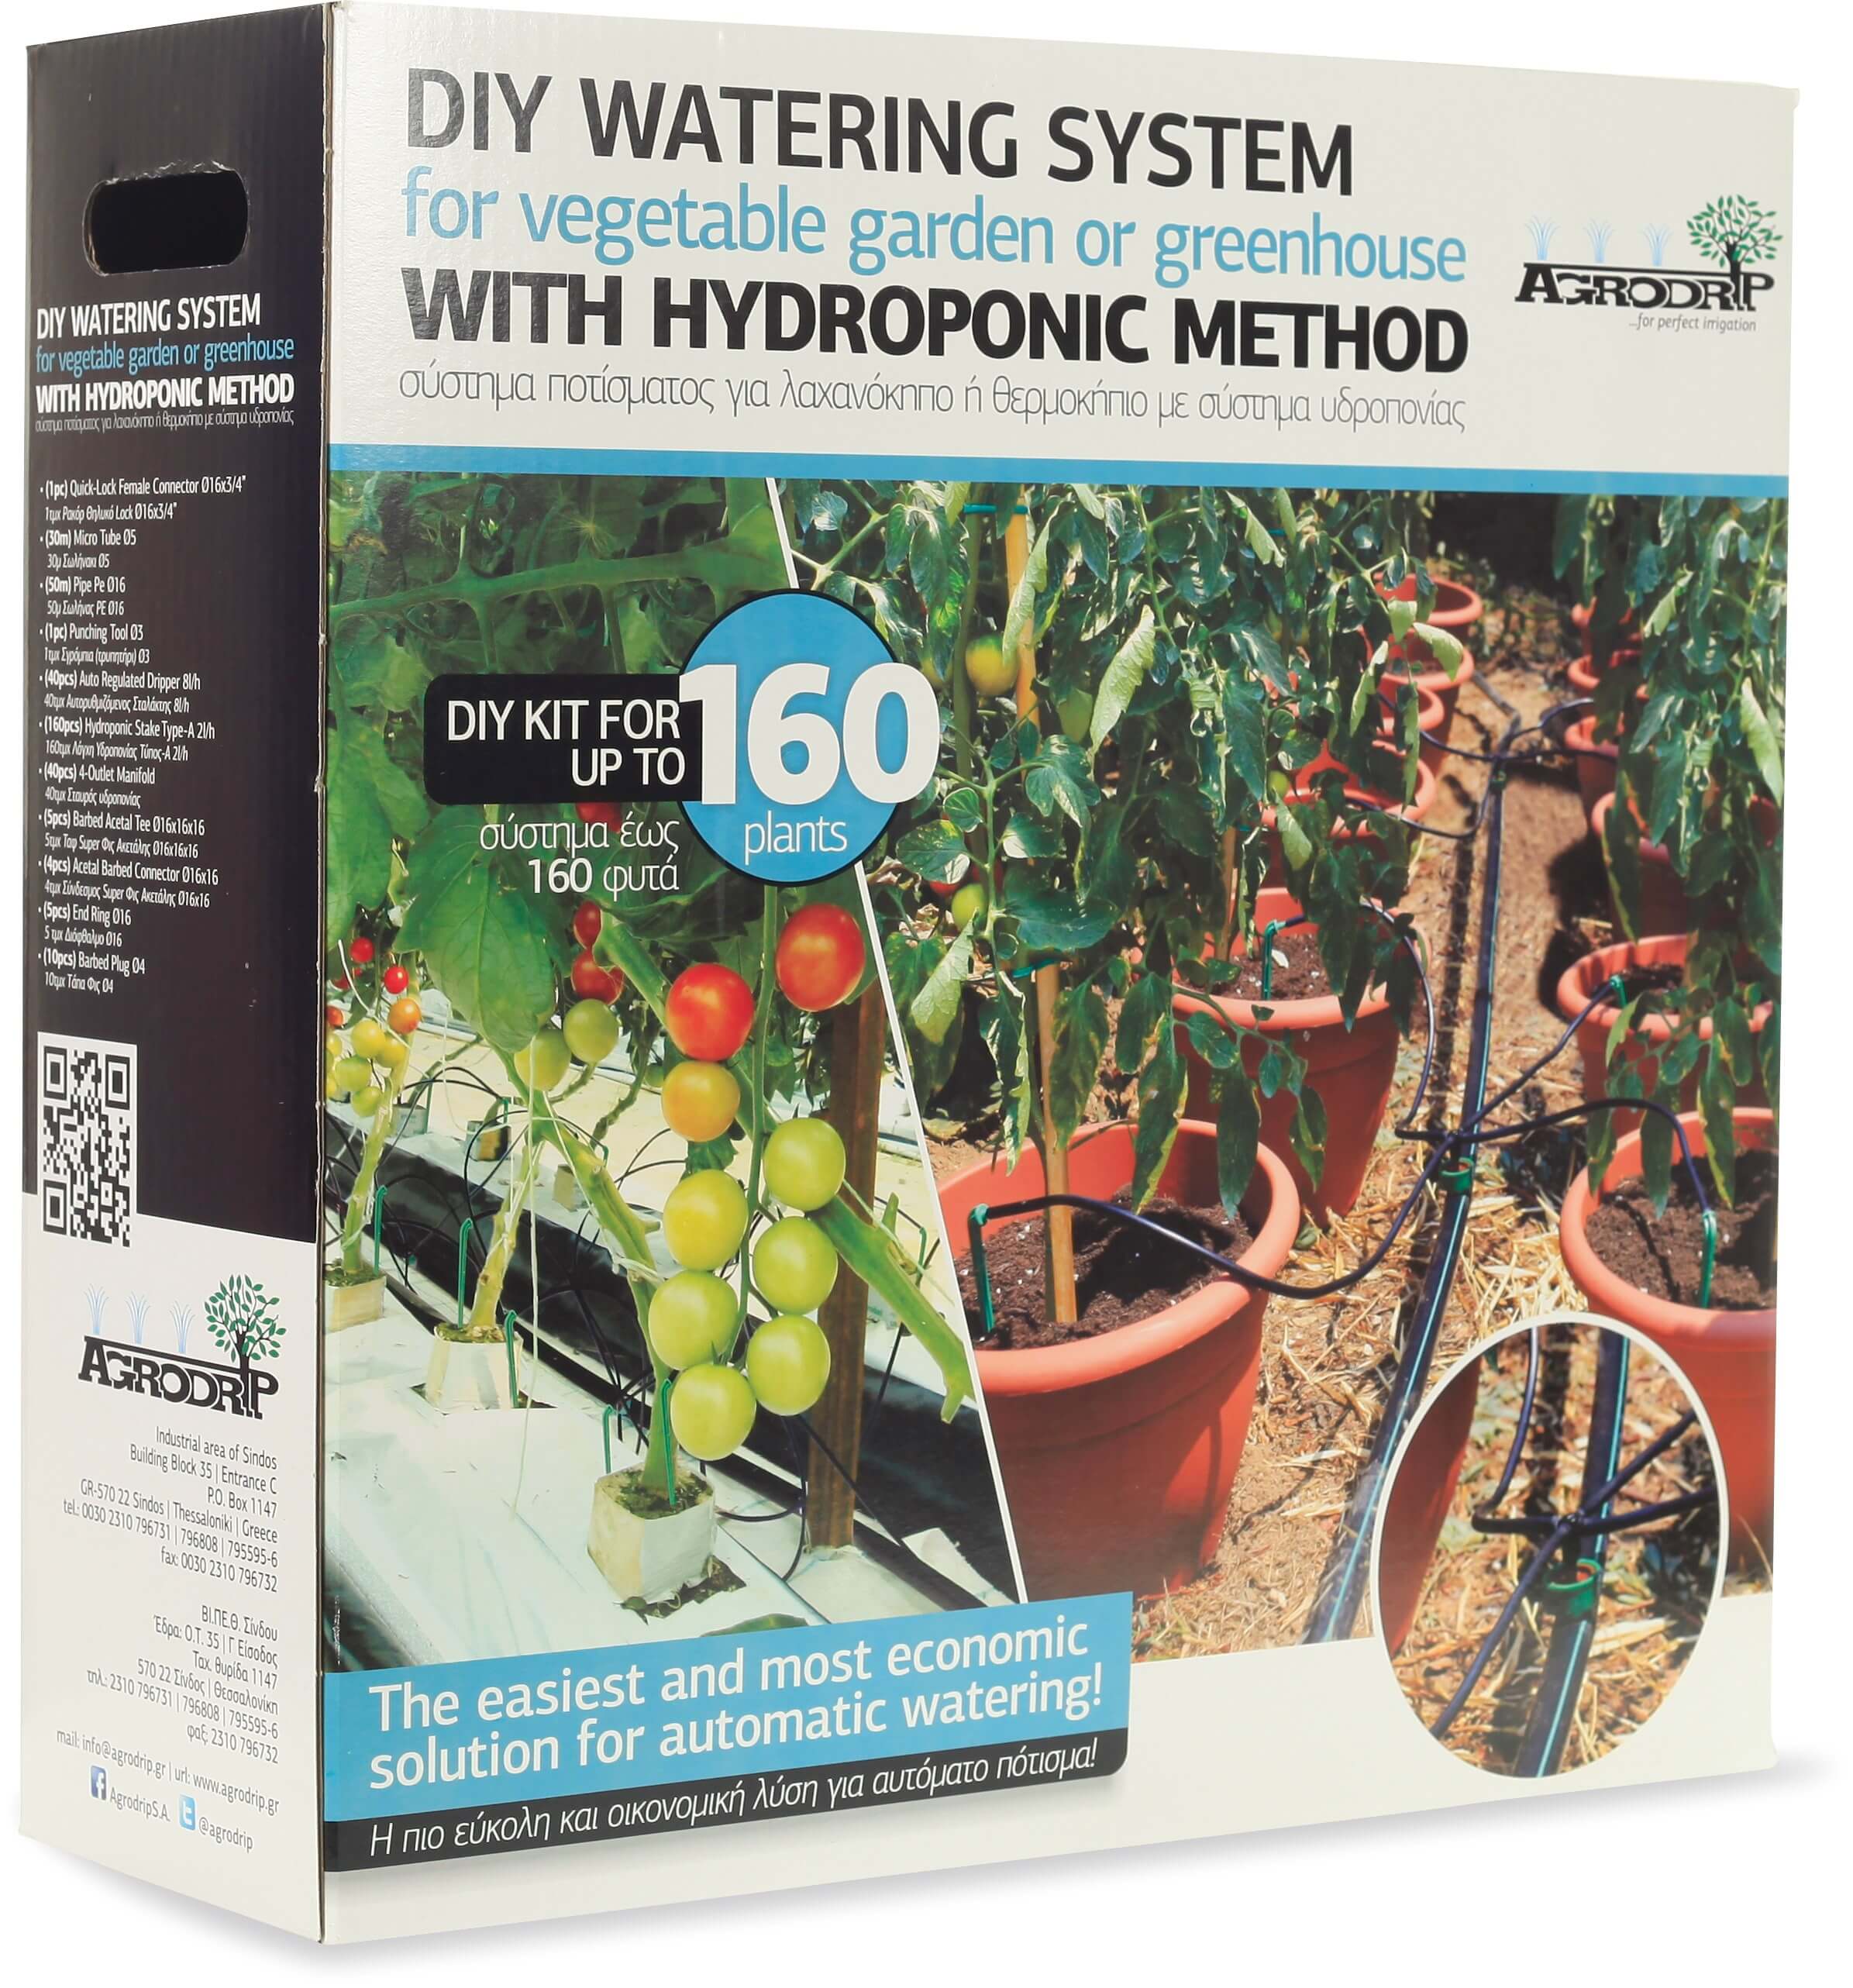 Agrodrip DIY watering system for vegetable garden or greenhouse up to 160 plants with hydroponic method